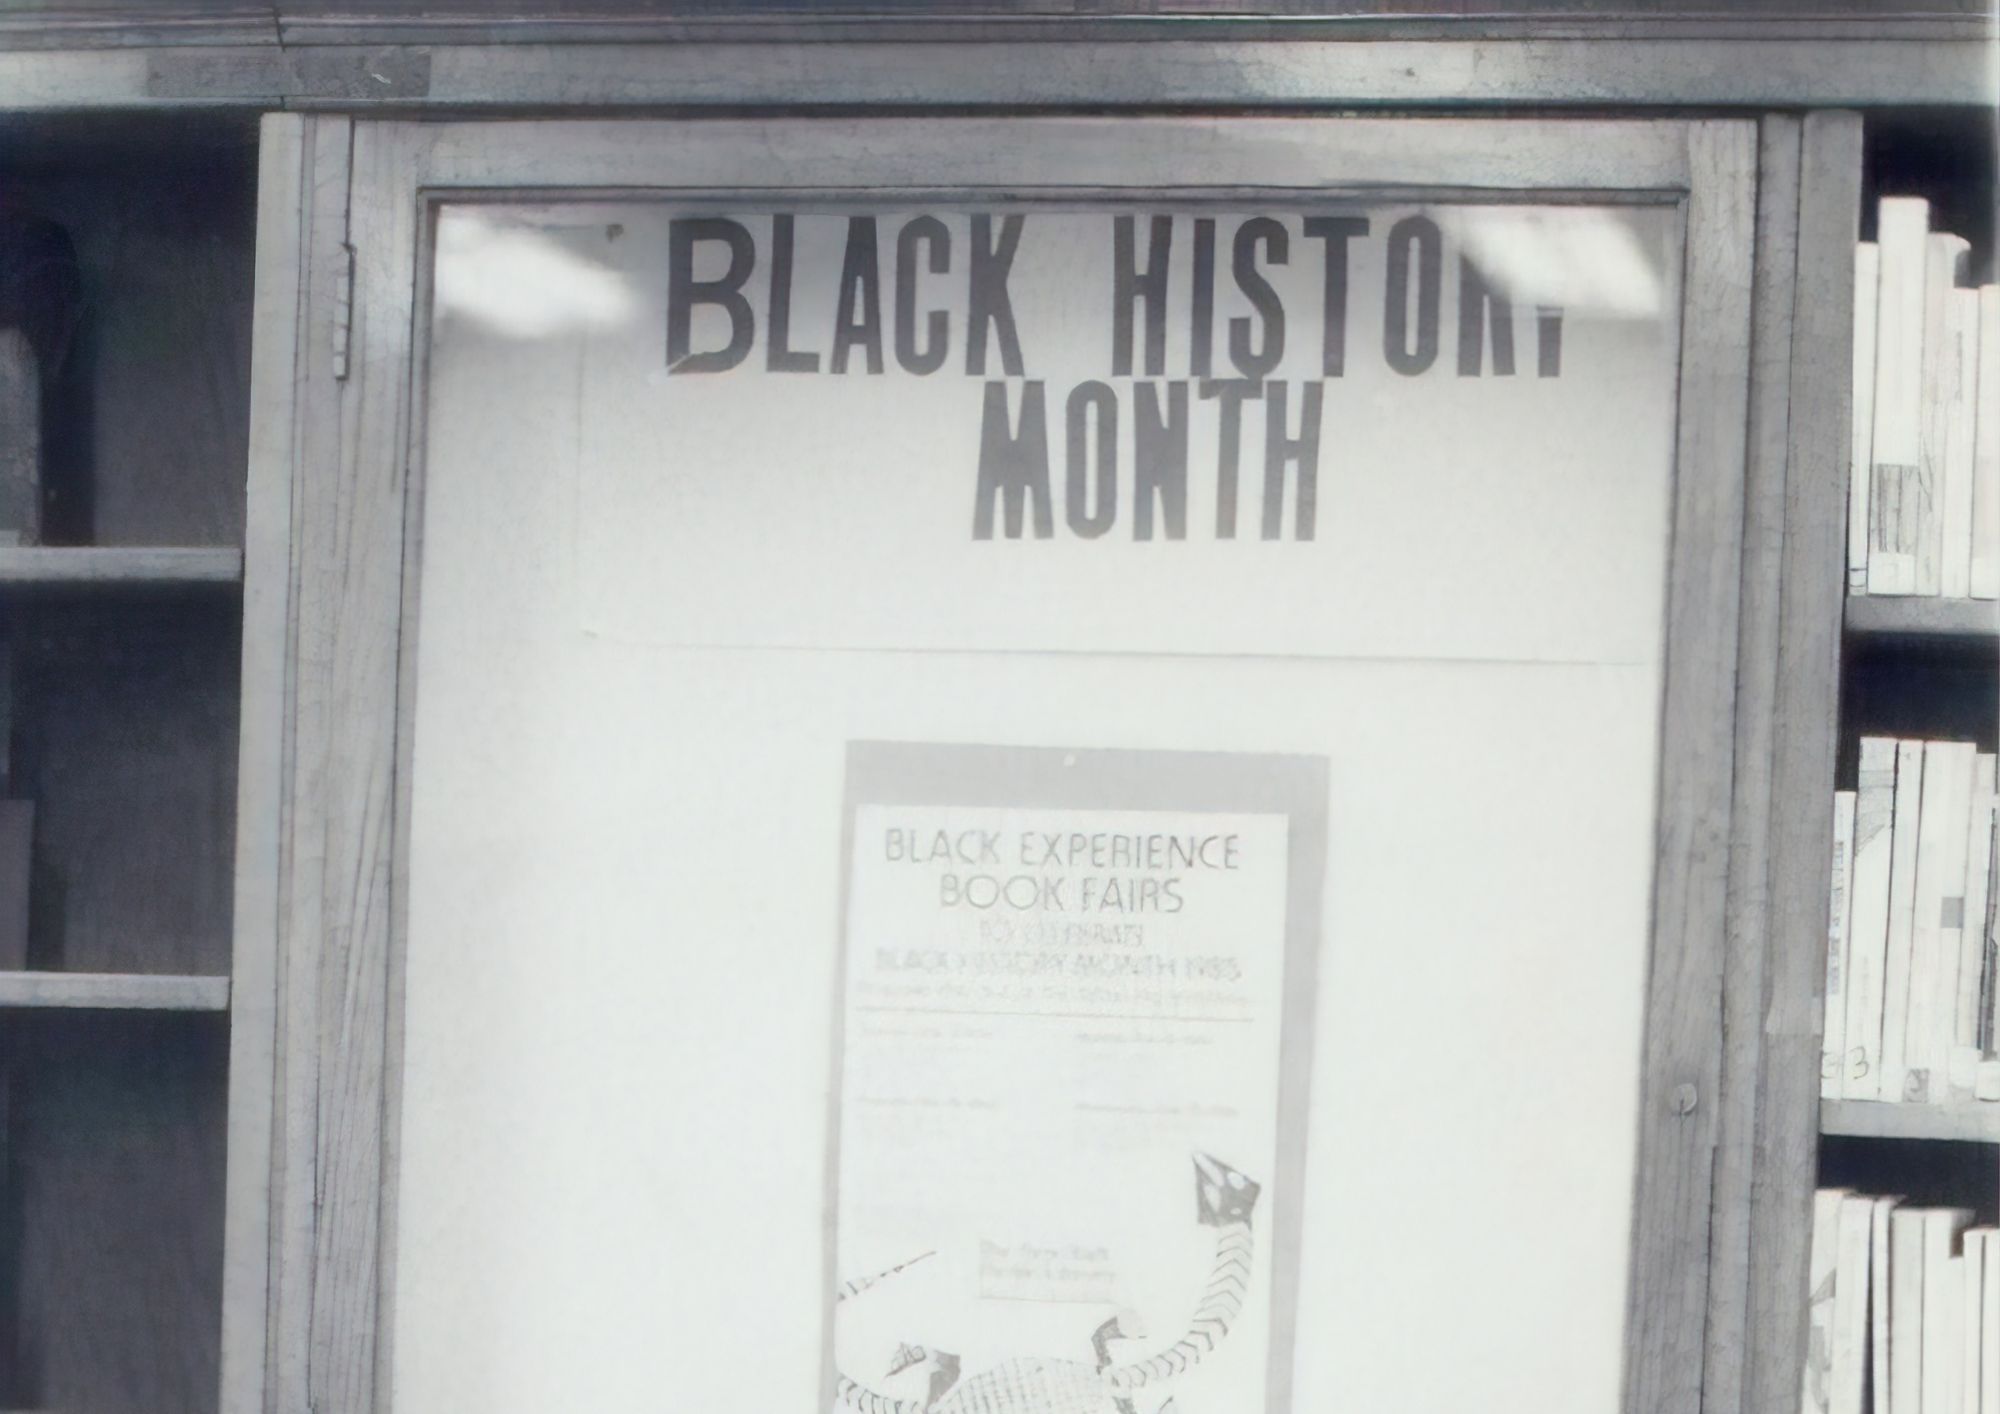 Black History Month: The Home of the Brave